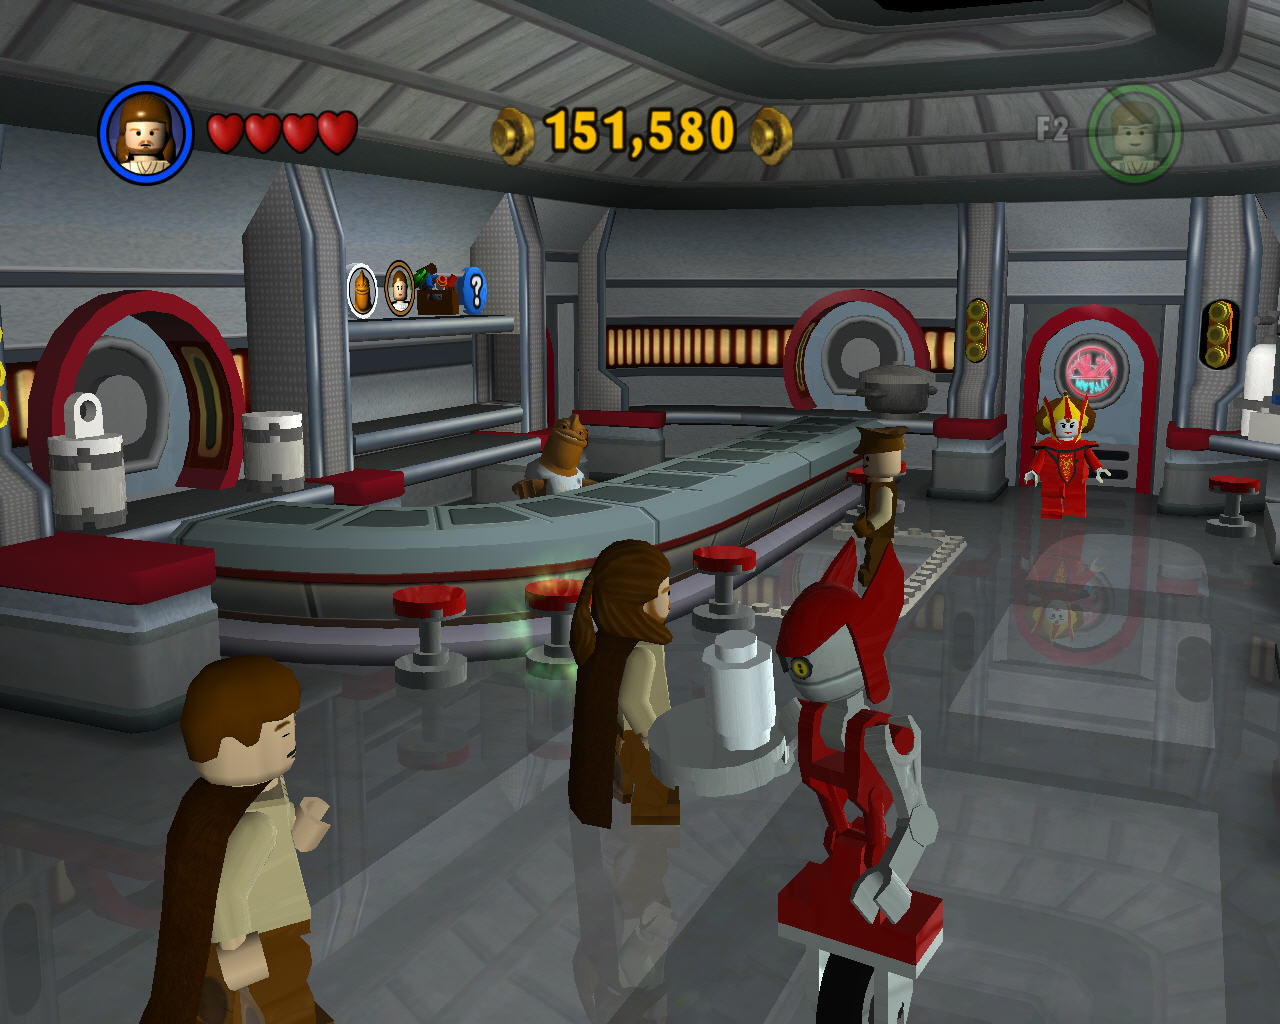 LEGO Star Wars: The Video Game #21